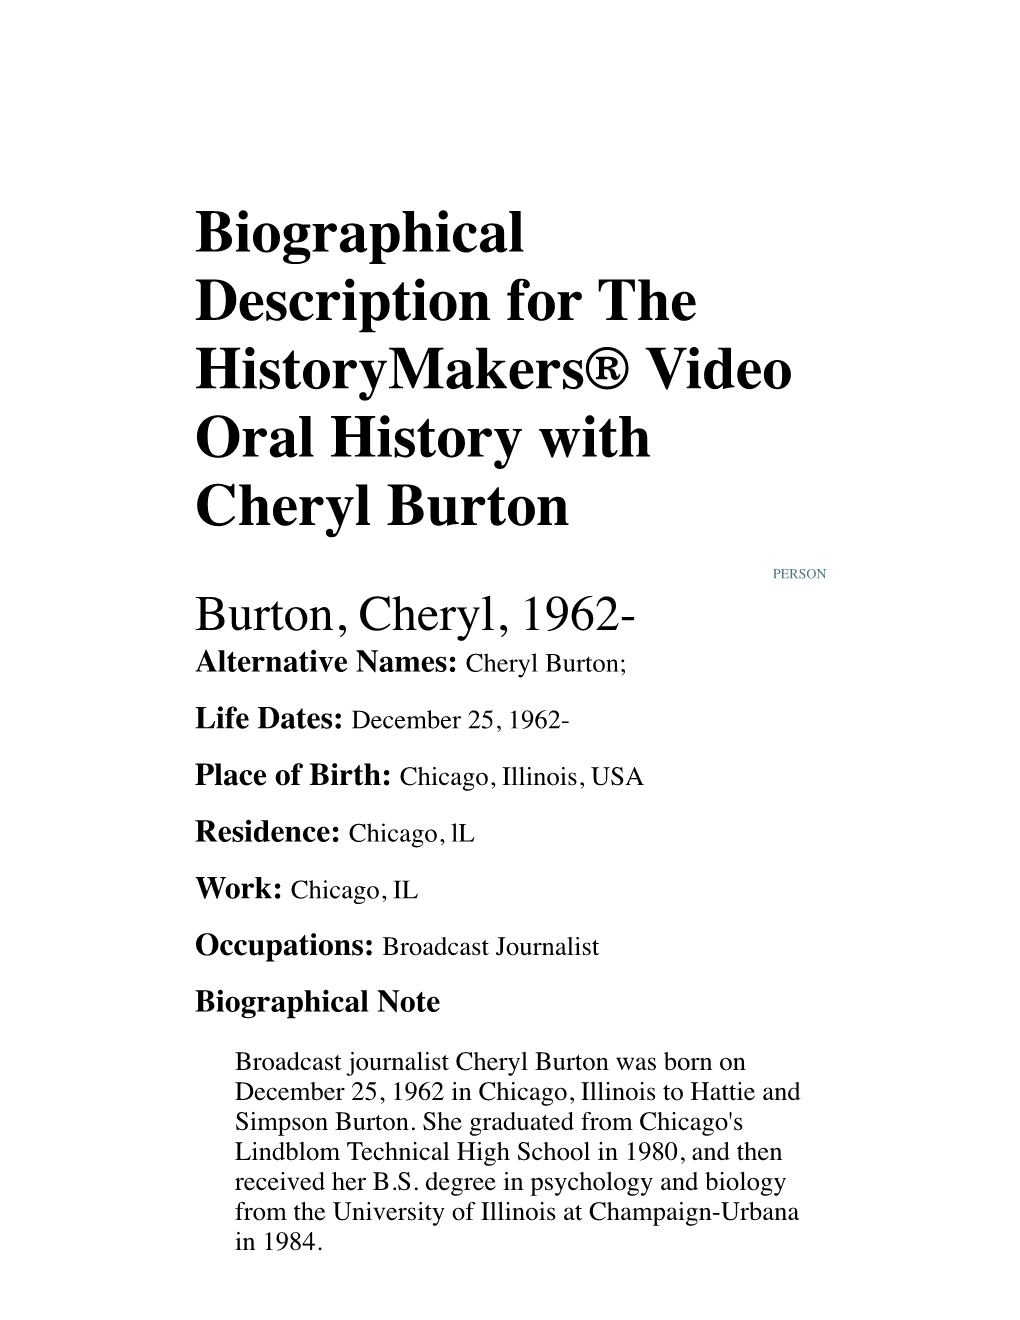 Biographical Description for the Historymakers® Video Oral History with Cheryl Burton